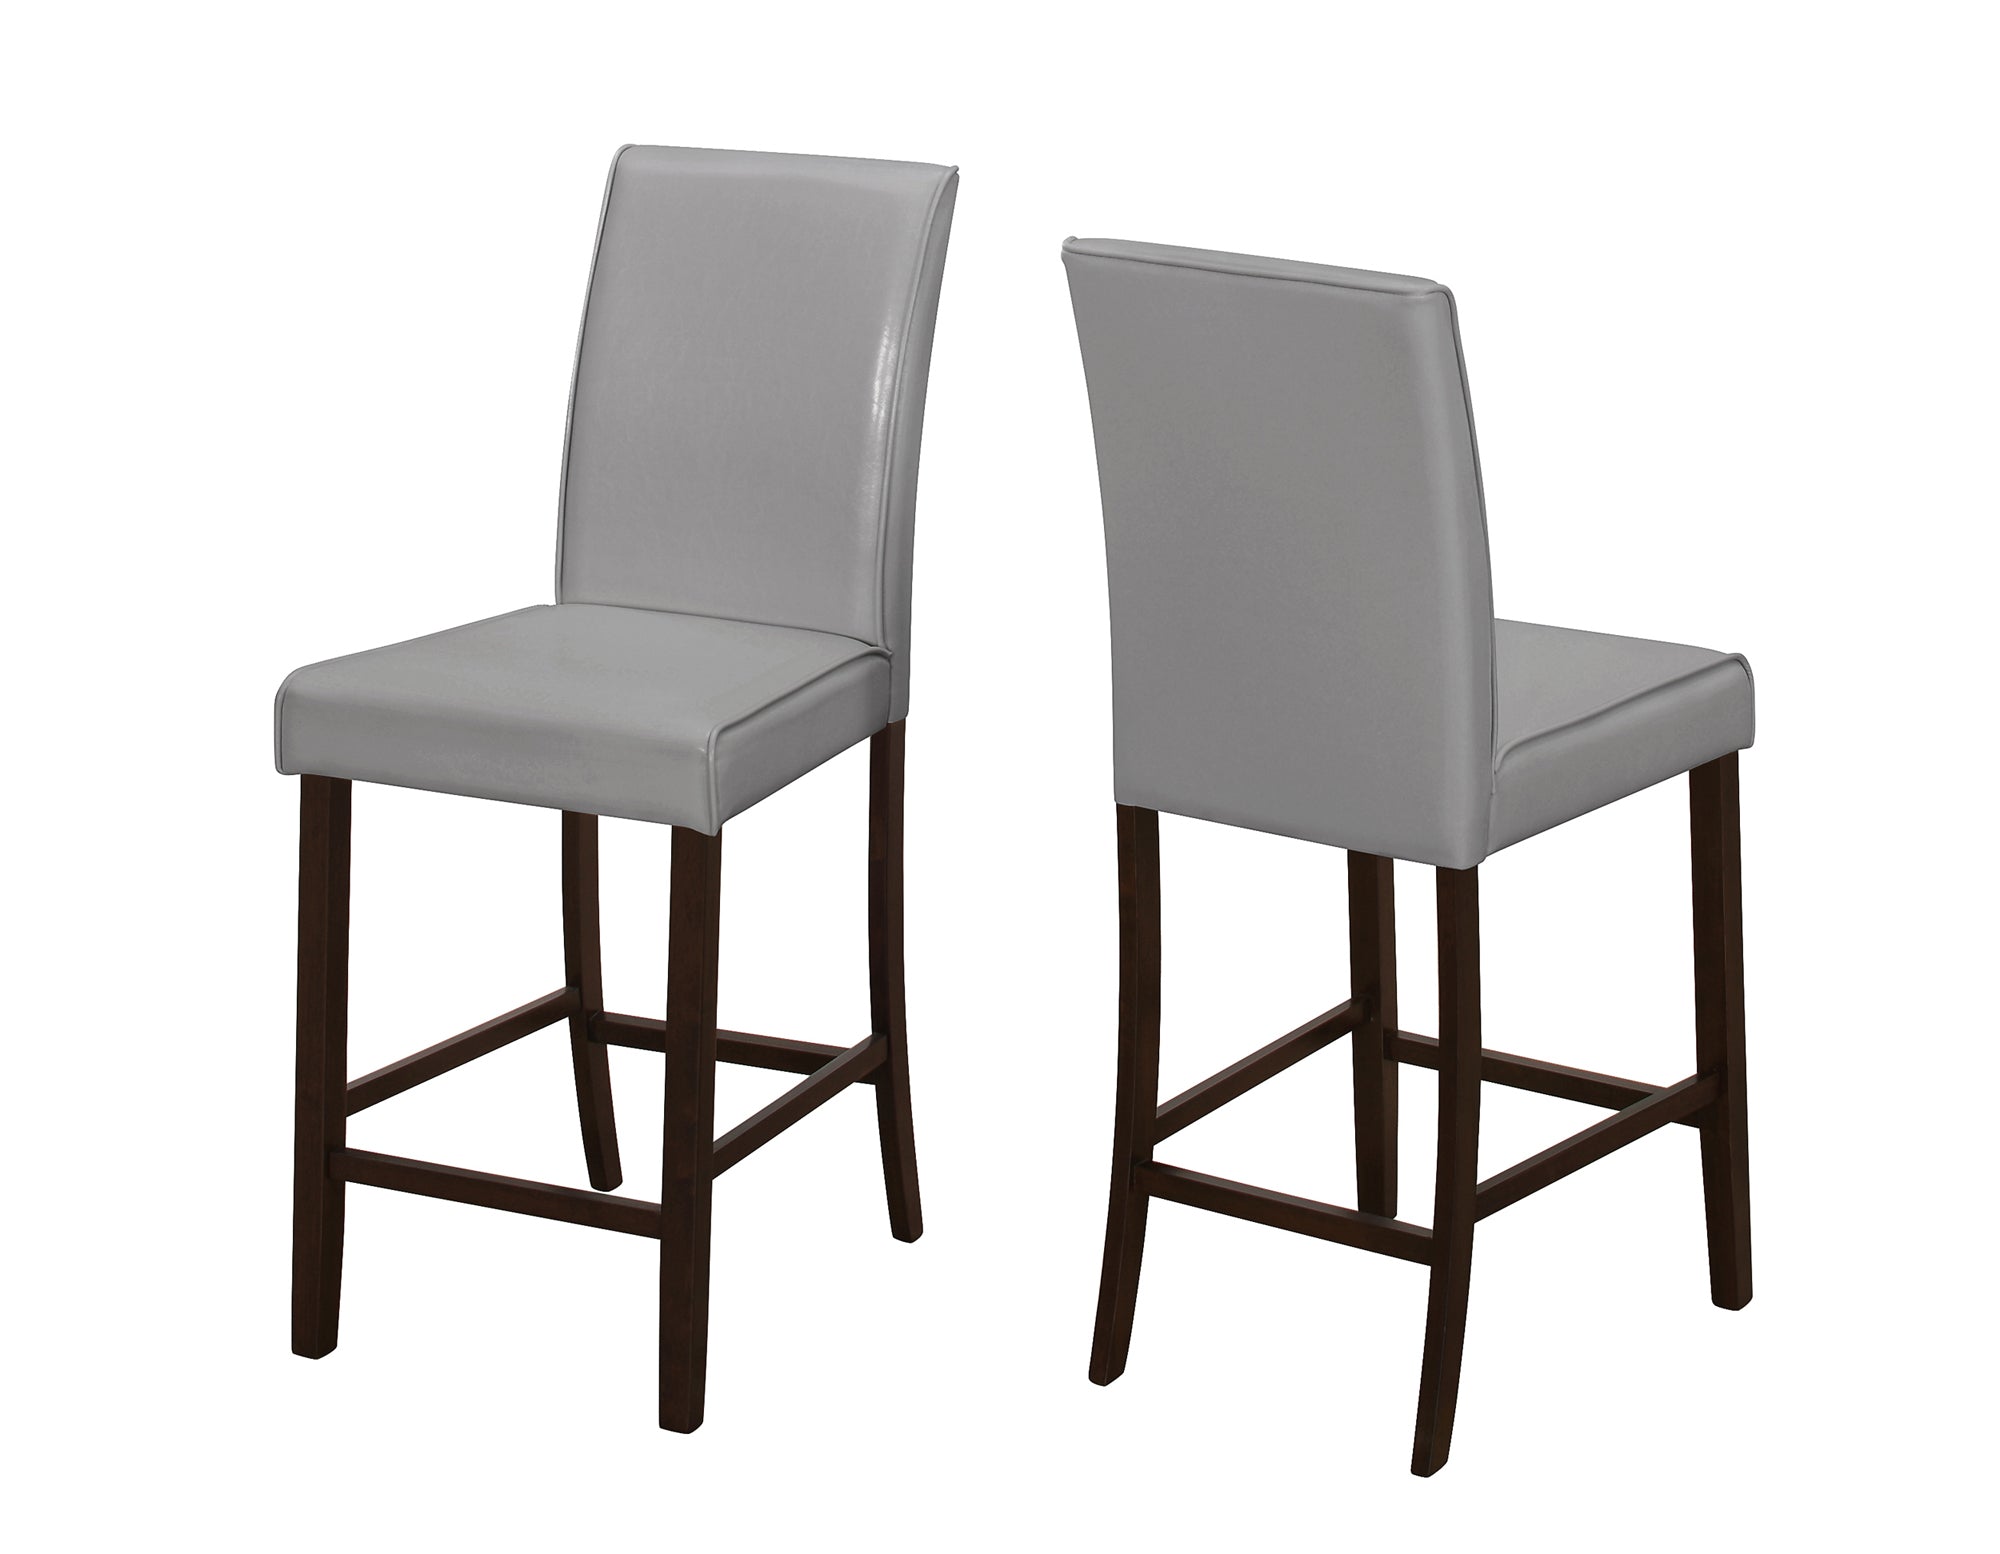 DINING CHAIR - 2PCS / BROWN LEATHER-LOOK COUNTER HEIGHT